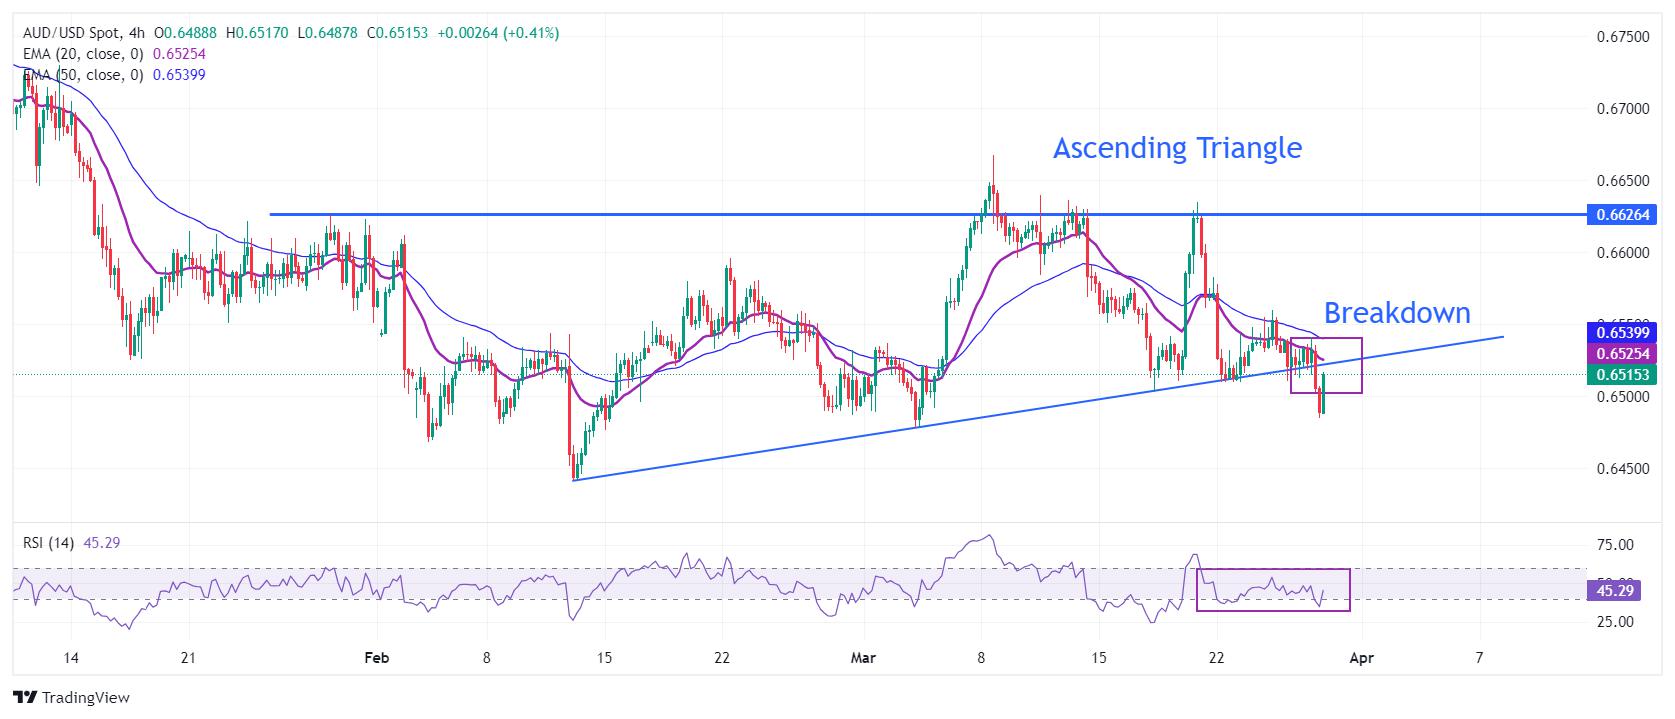 AUD/USD Price Analysis: Likely test Ascending Triangle’s breakdown near 0.6520